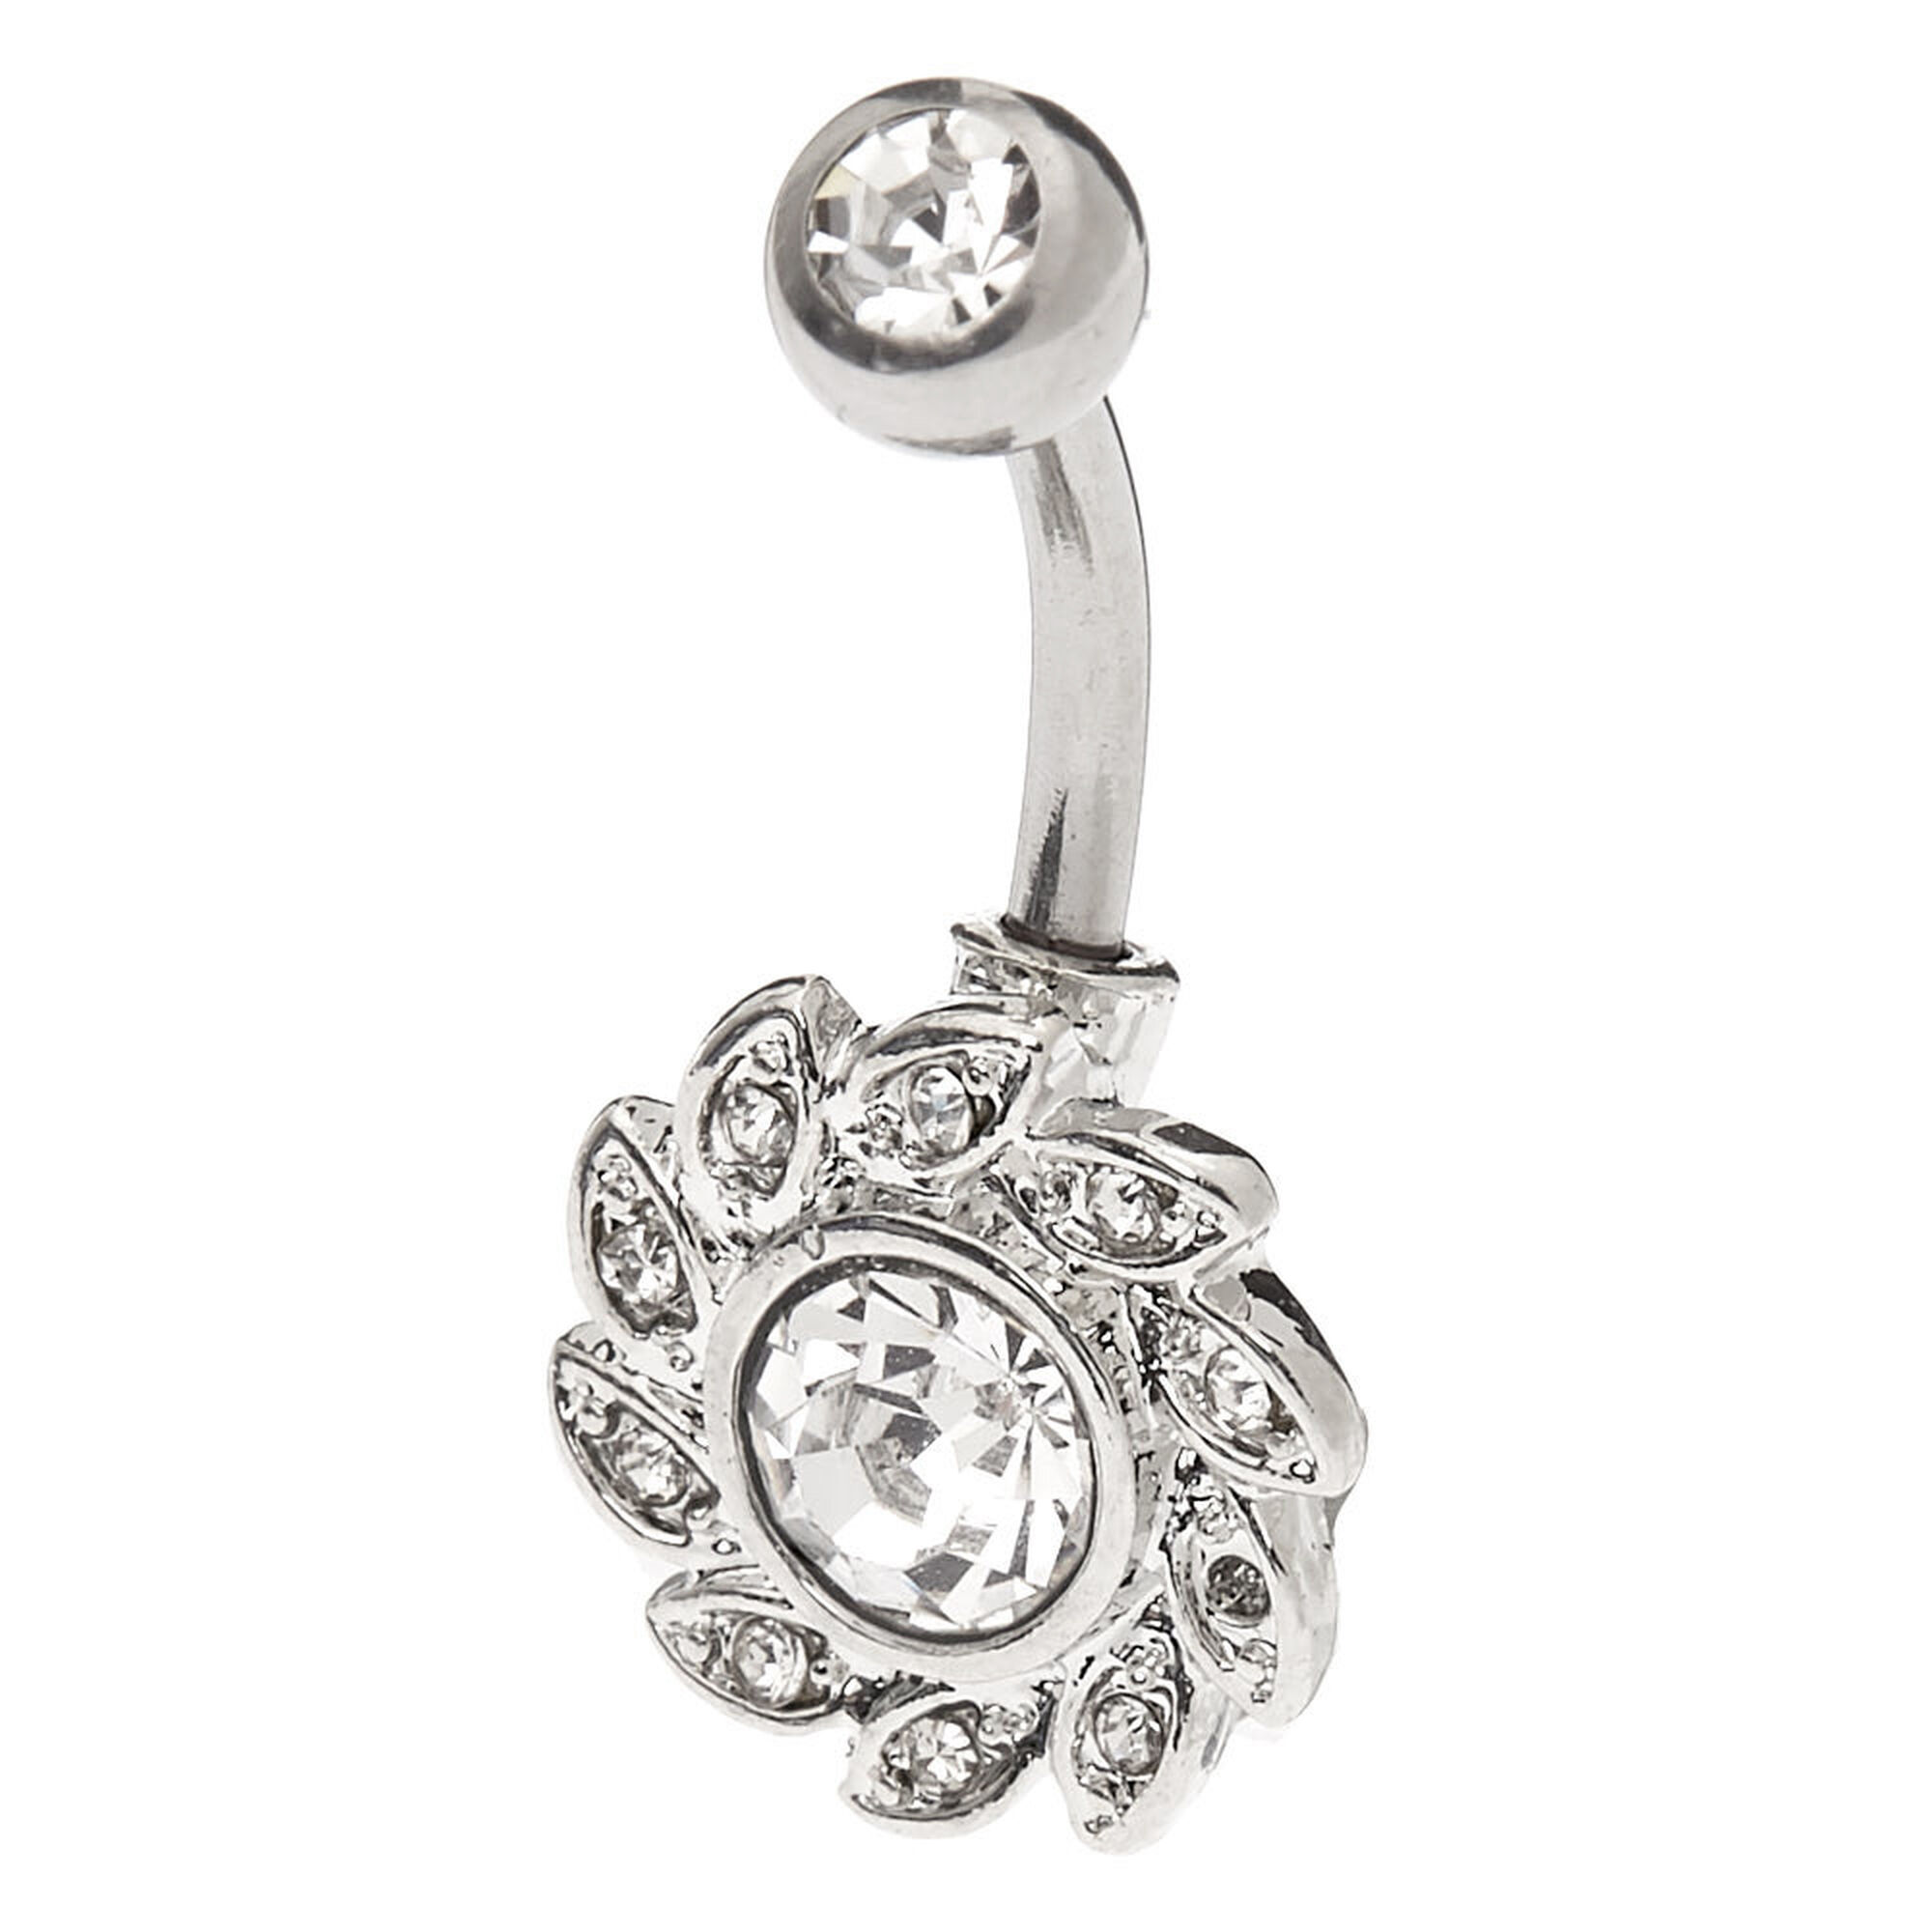 View Claires Tone Titanium 14G Crystal Wreath Belly Ring Silver information